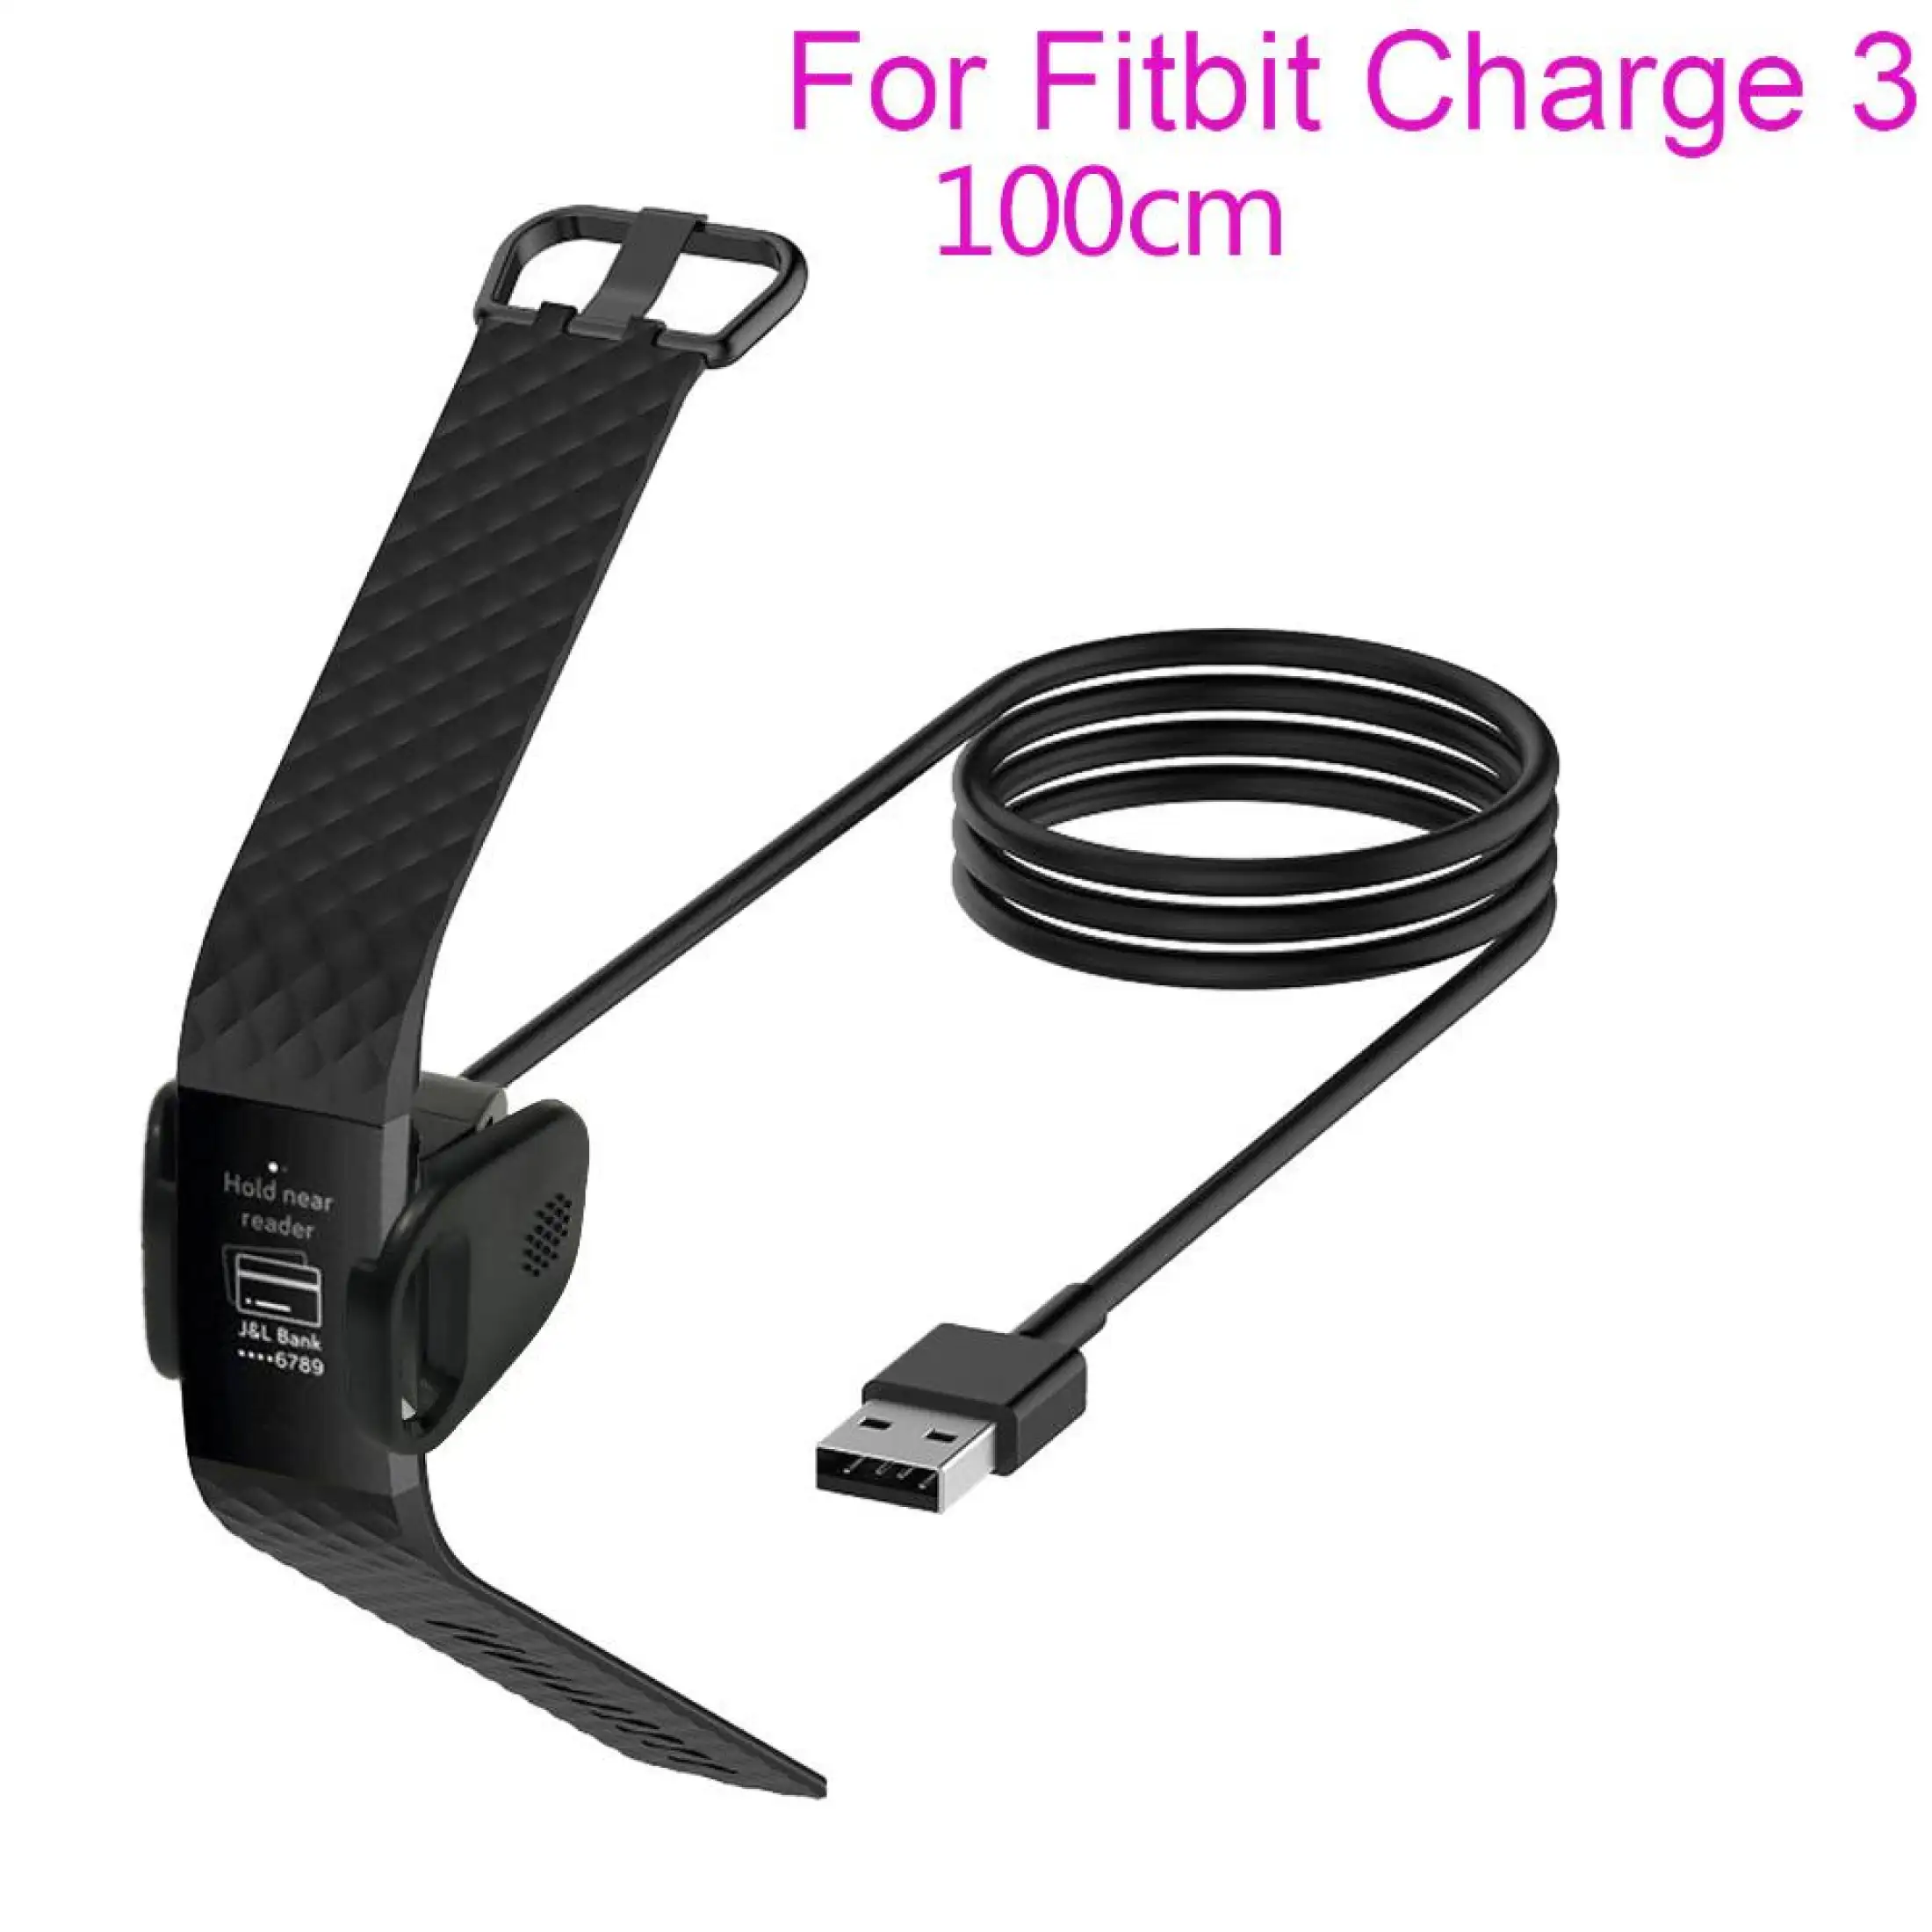 fitbit charge 3 replacement charger